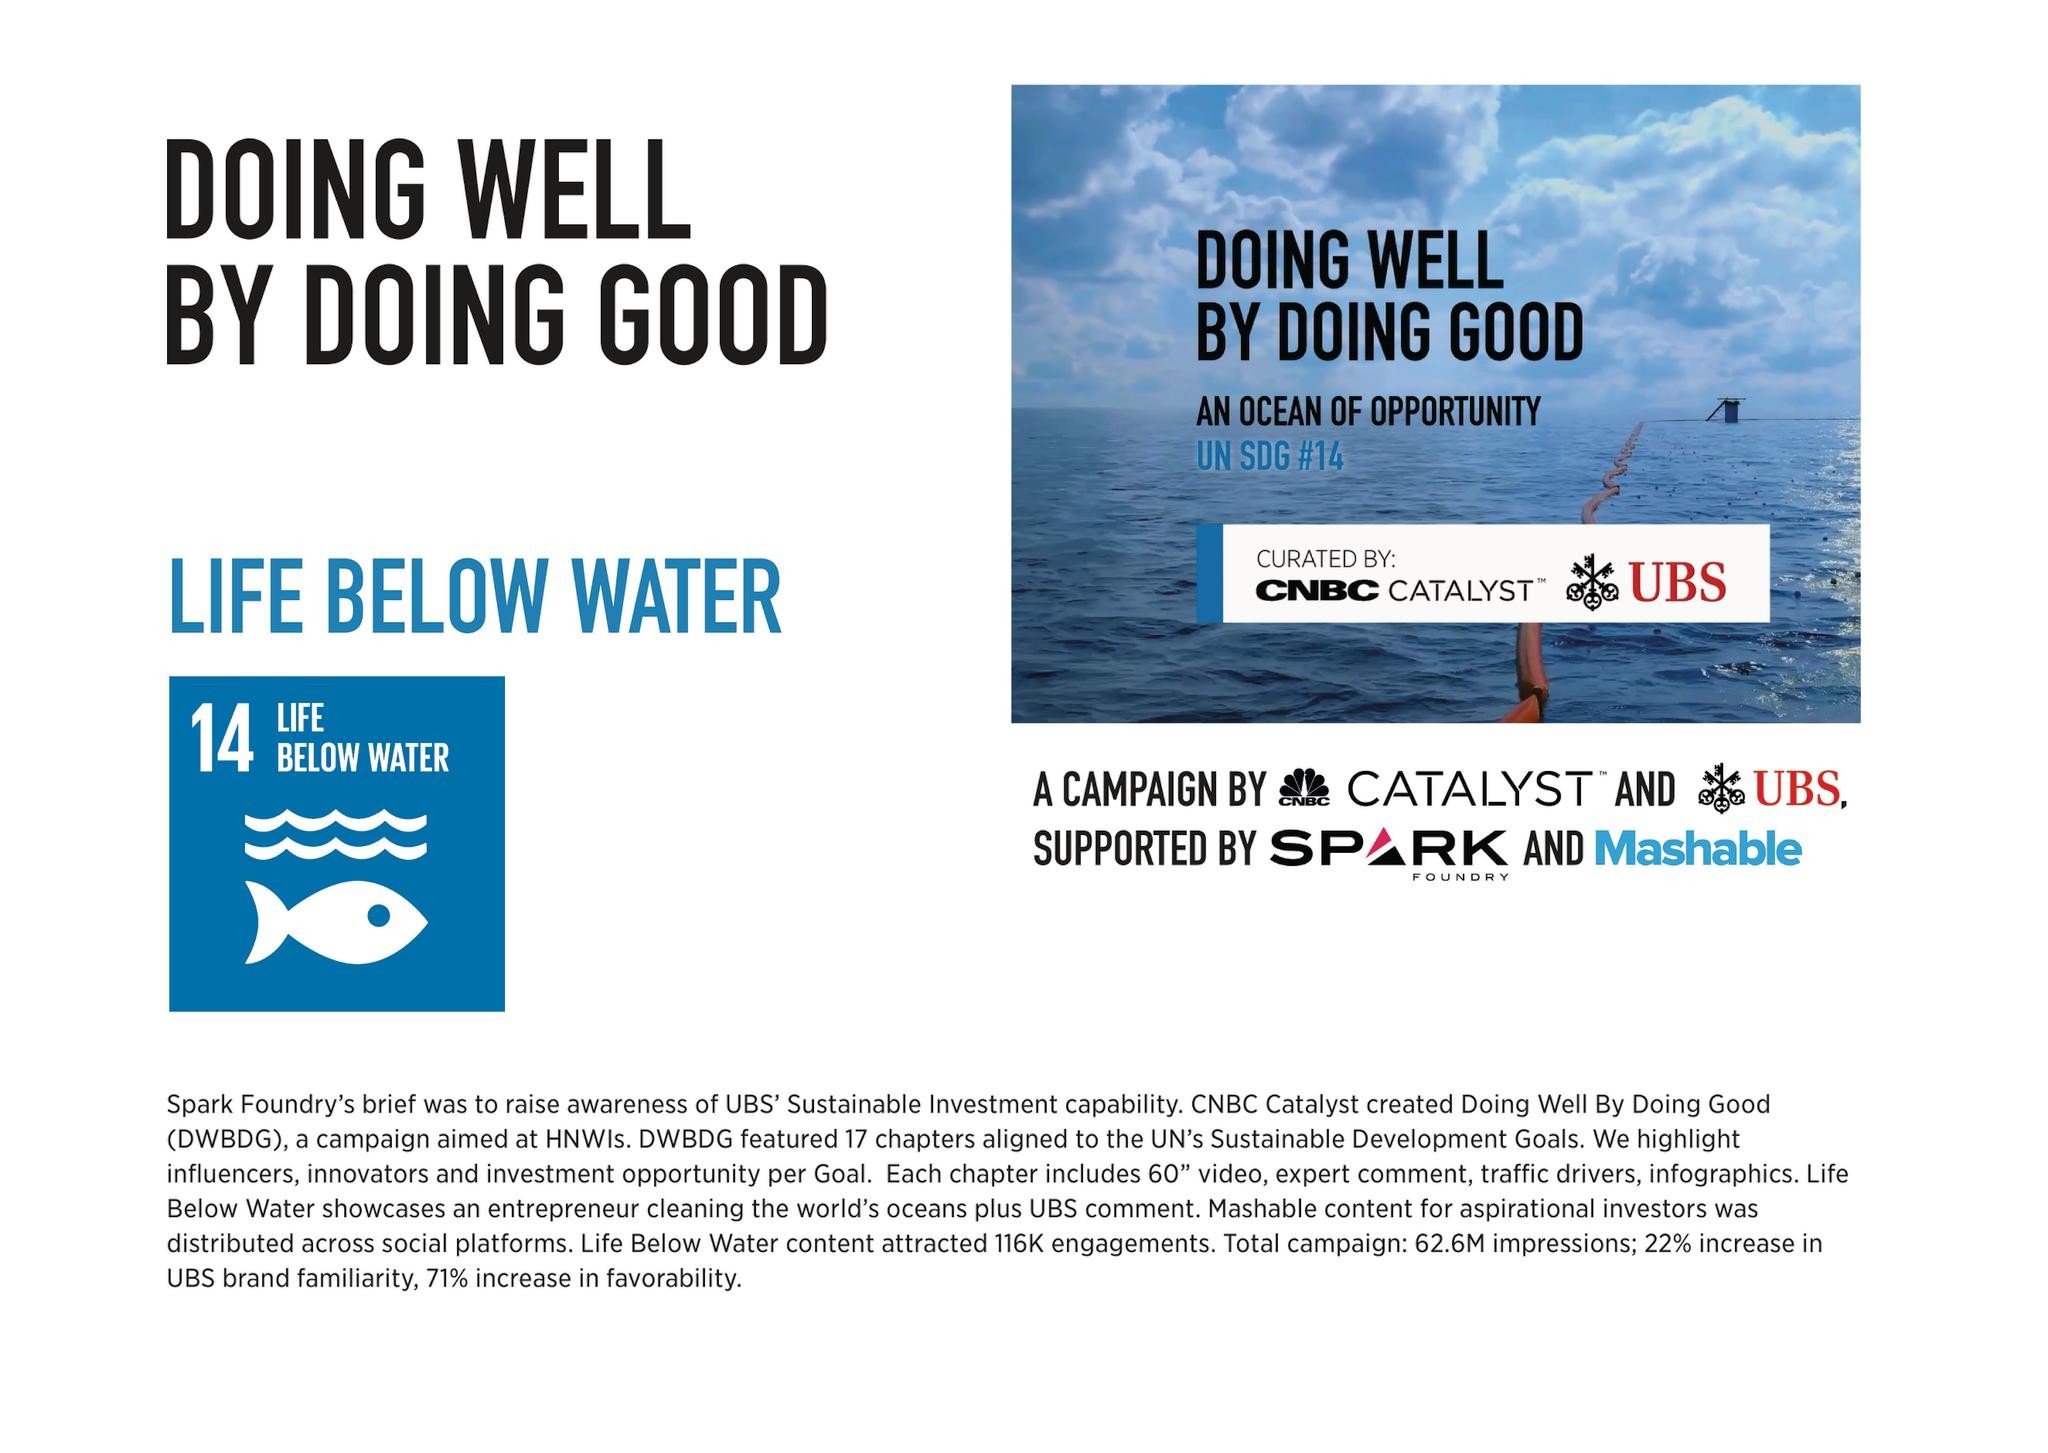 Doing Well by Doing Good - Life Below Water